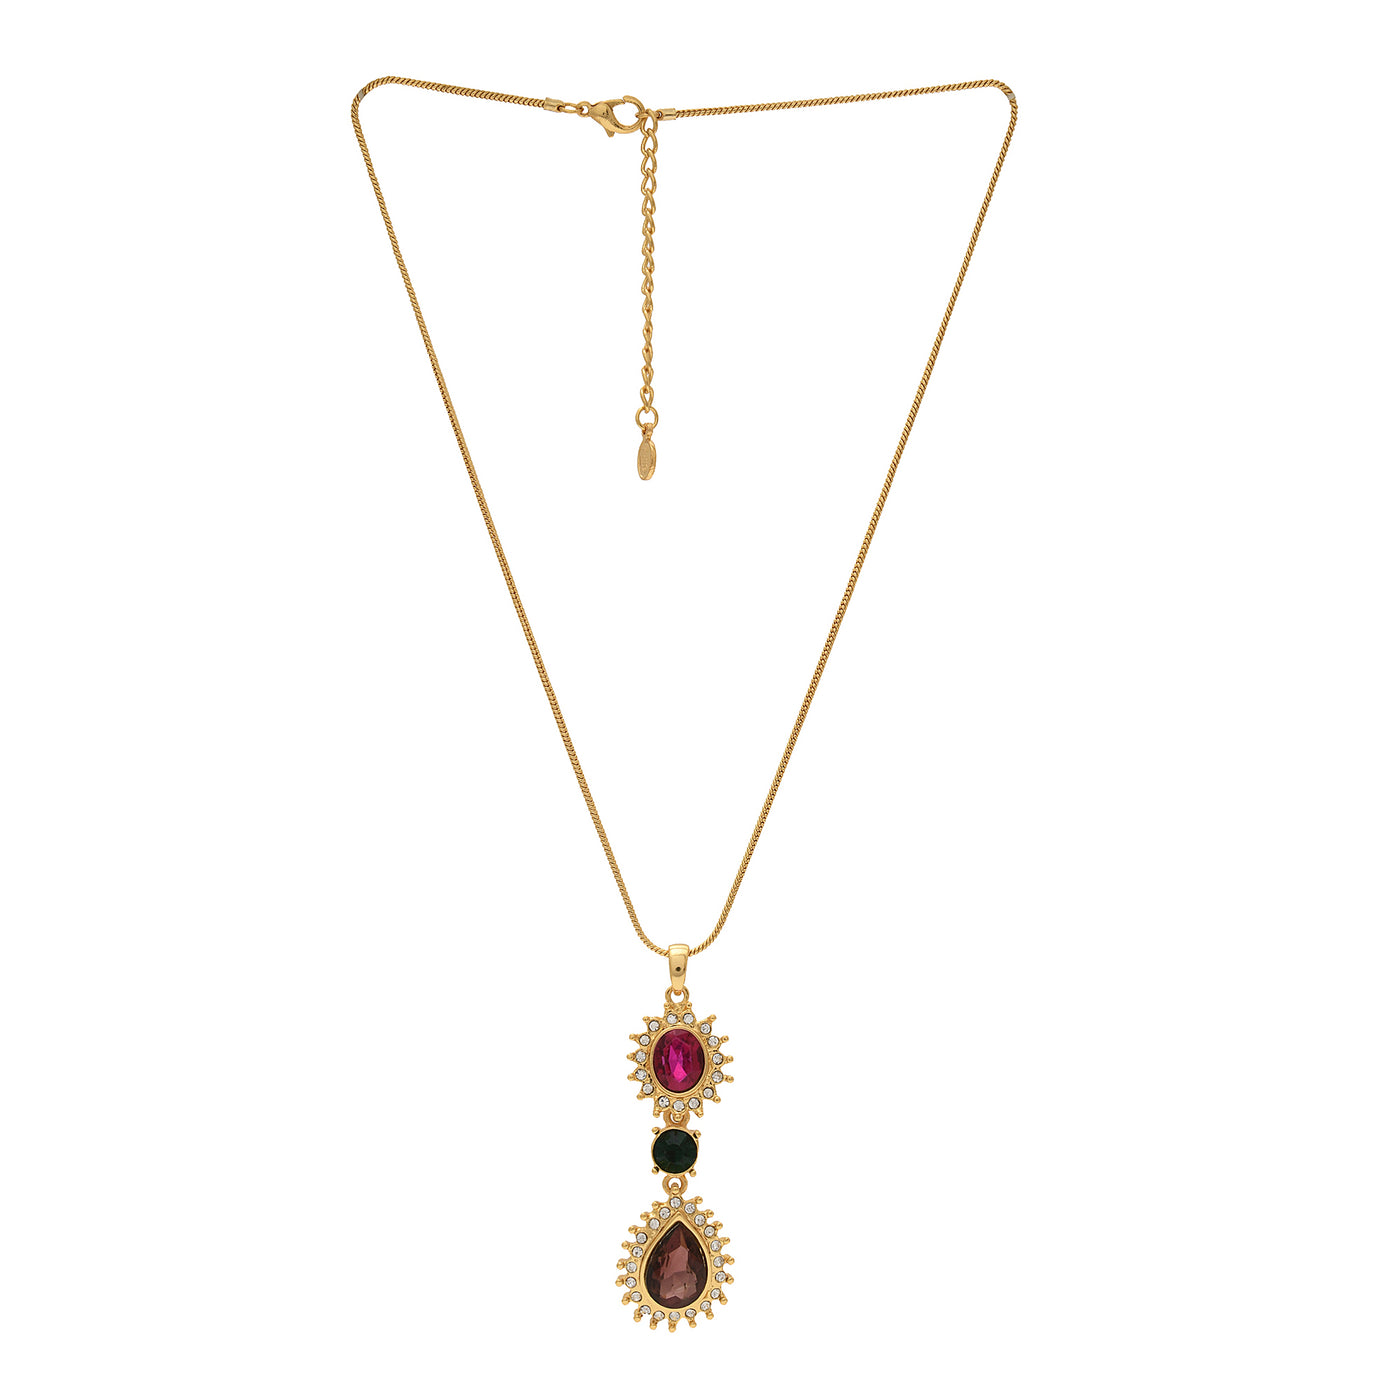 Stylish Gold Plated Sparkling Austrian crystal drop Necklace